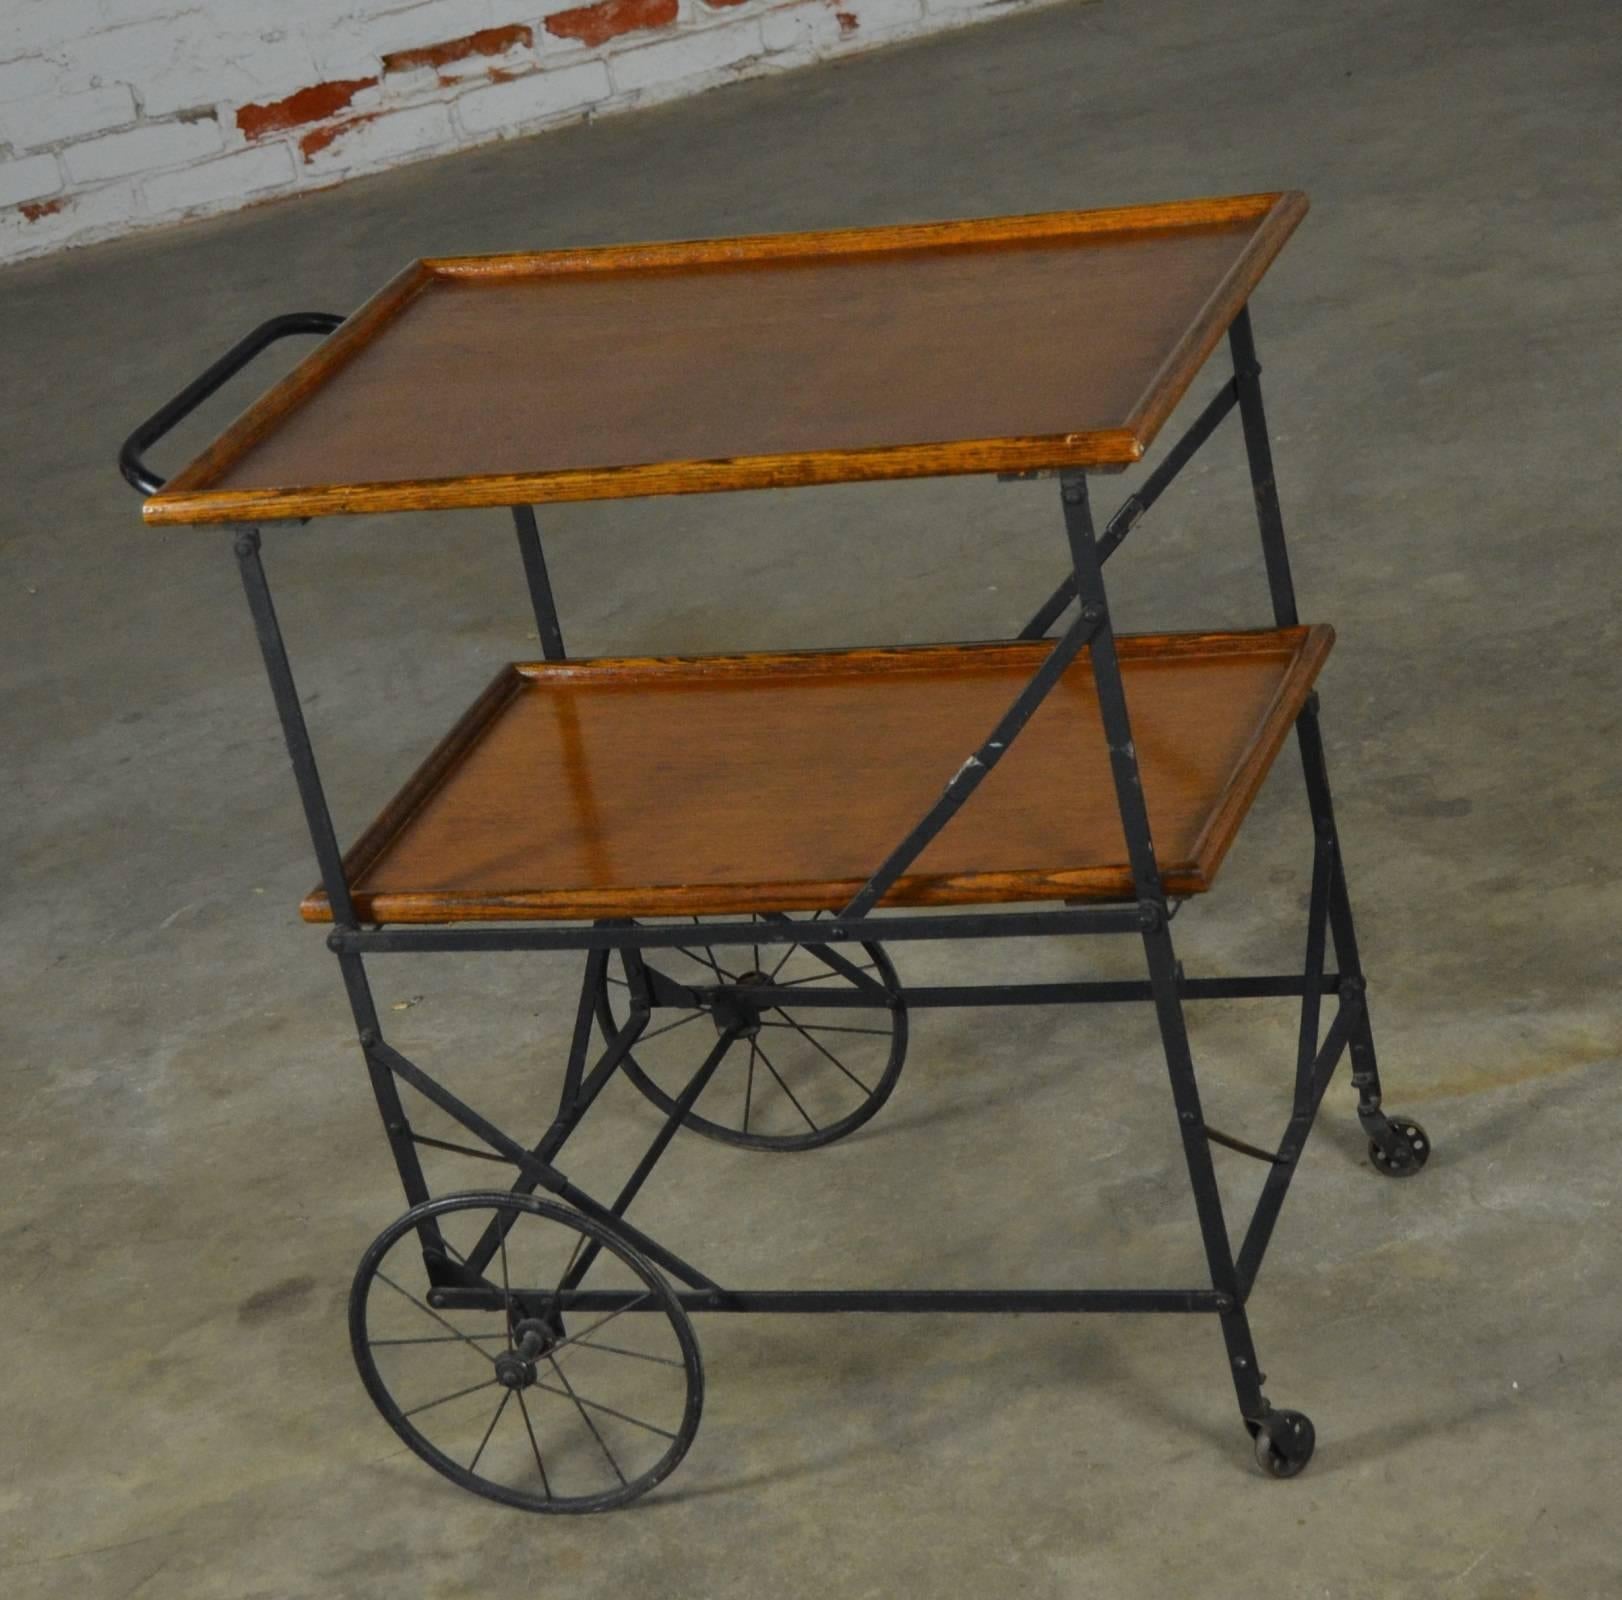 Fabulous Industrial chic antique rolling and folding tea cart, bar cart, or hotel serving trolley consisting of black painted iron with oak shelves and spooked baby buggy style wheels. In wonderful antique condition.

Presenting this incredible